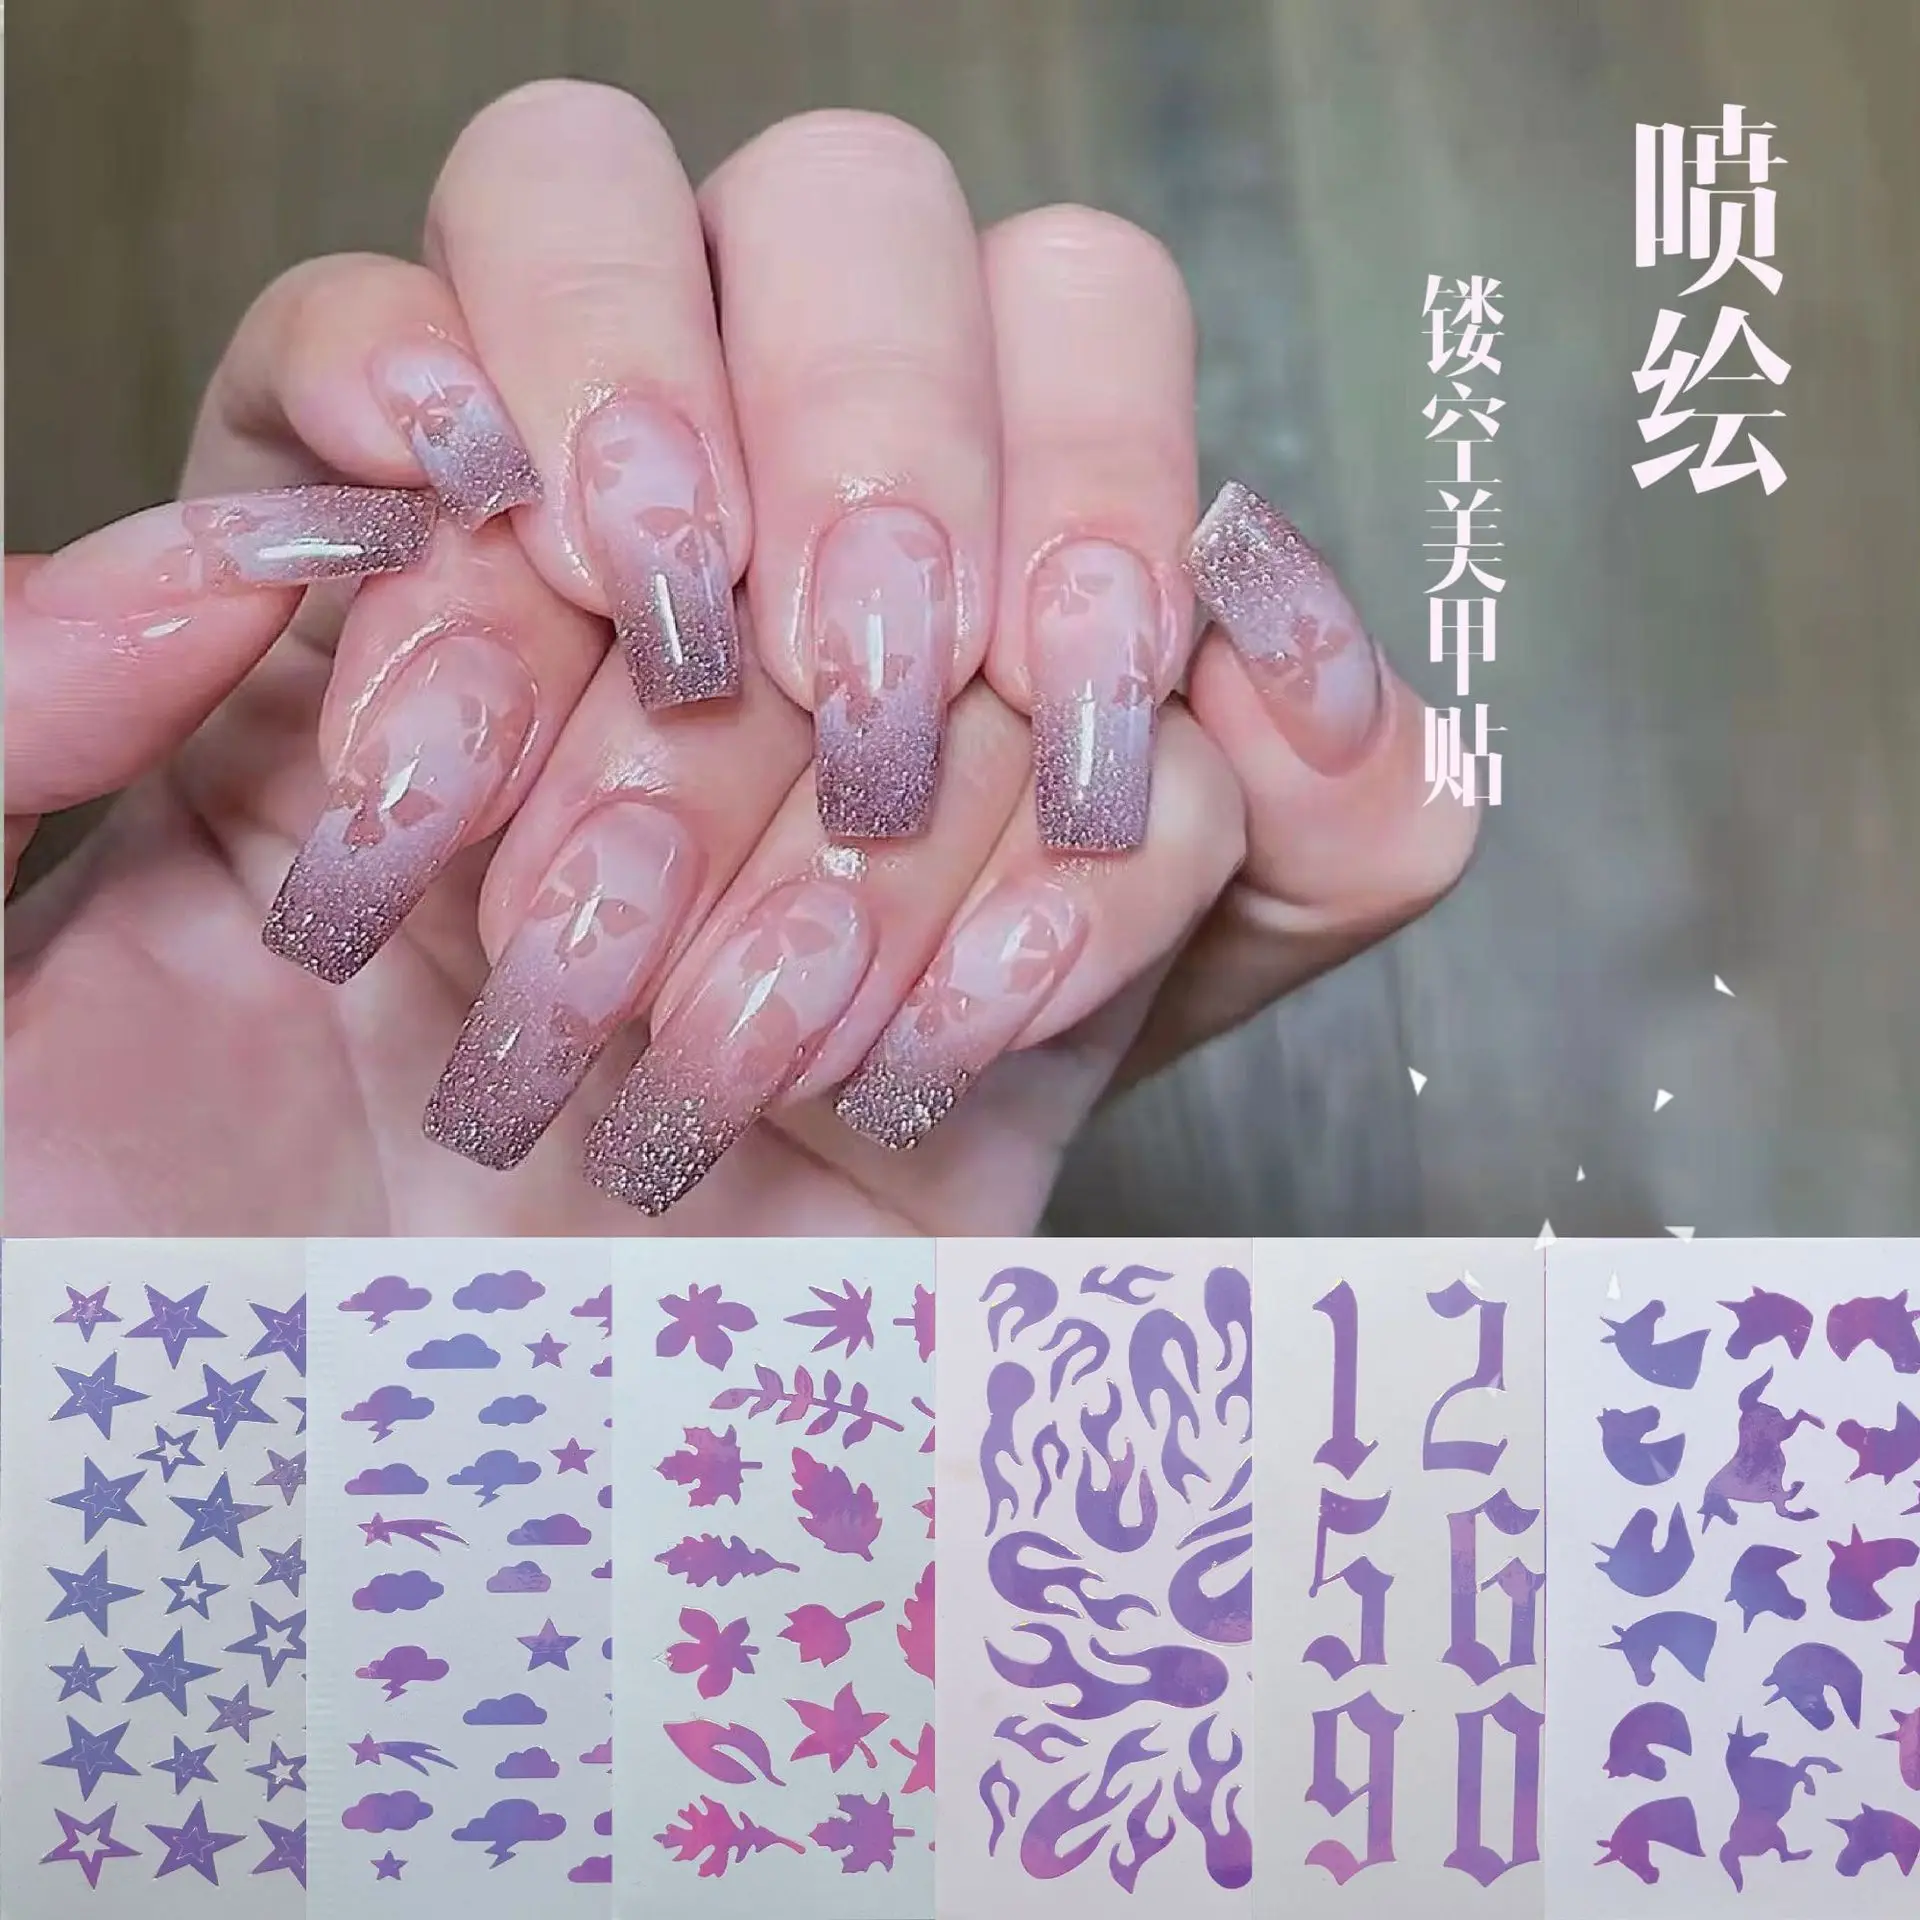 Airbrush Nail Art Stencils Spray Template Nail Stickers Butterfly